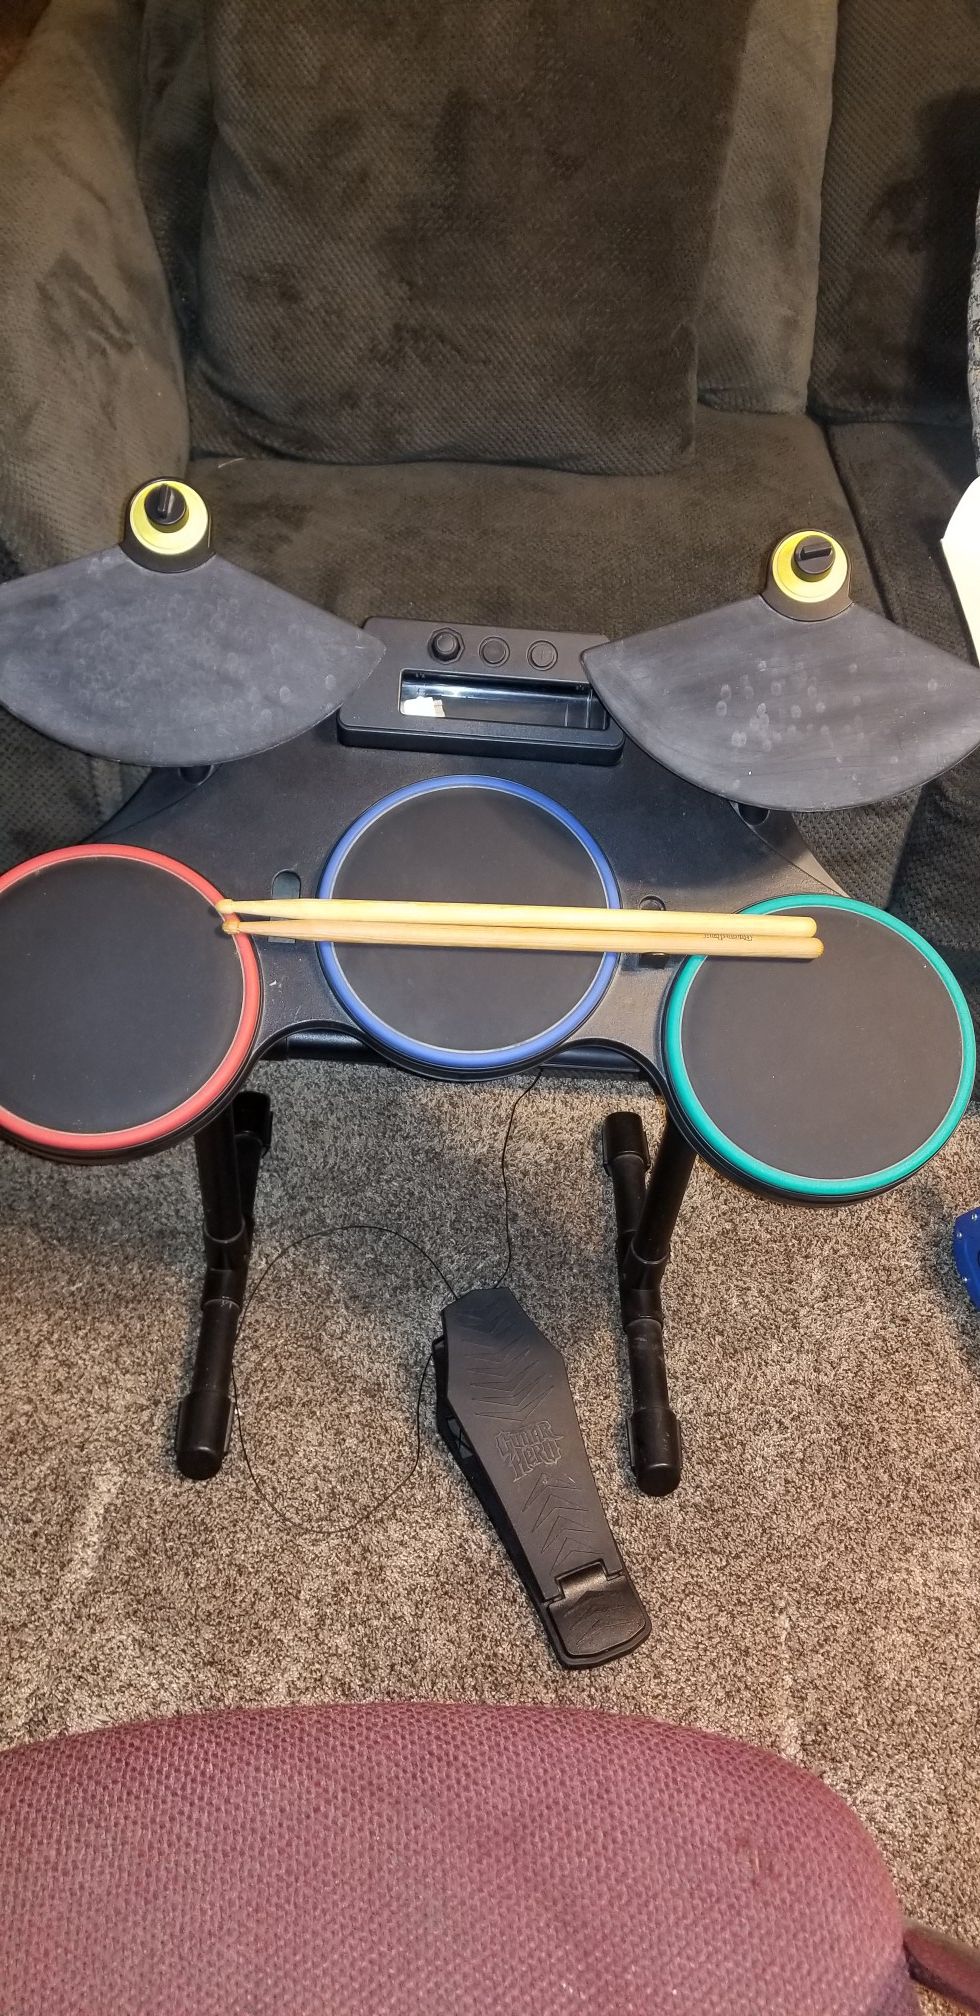 Wii Drum Set for Rock Band